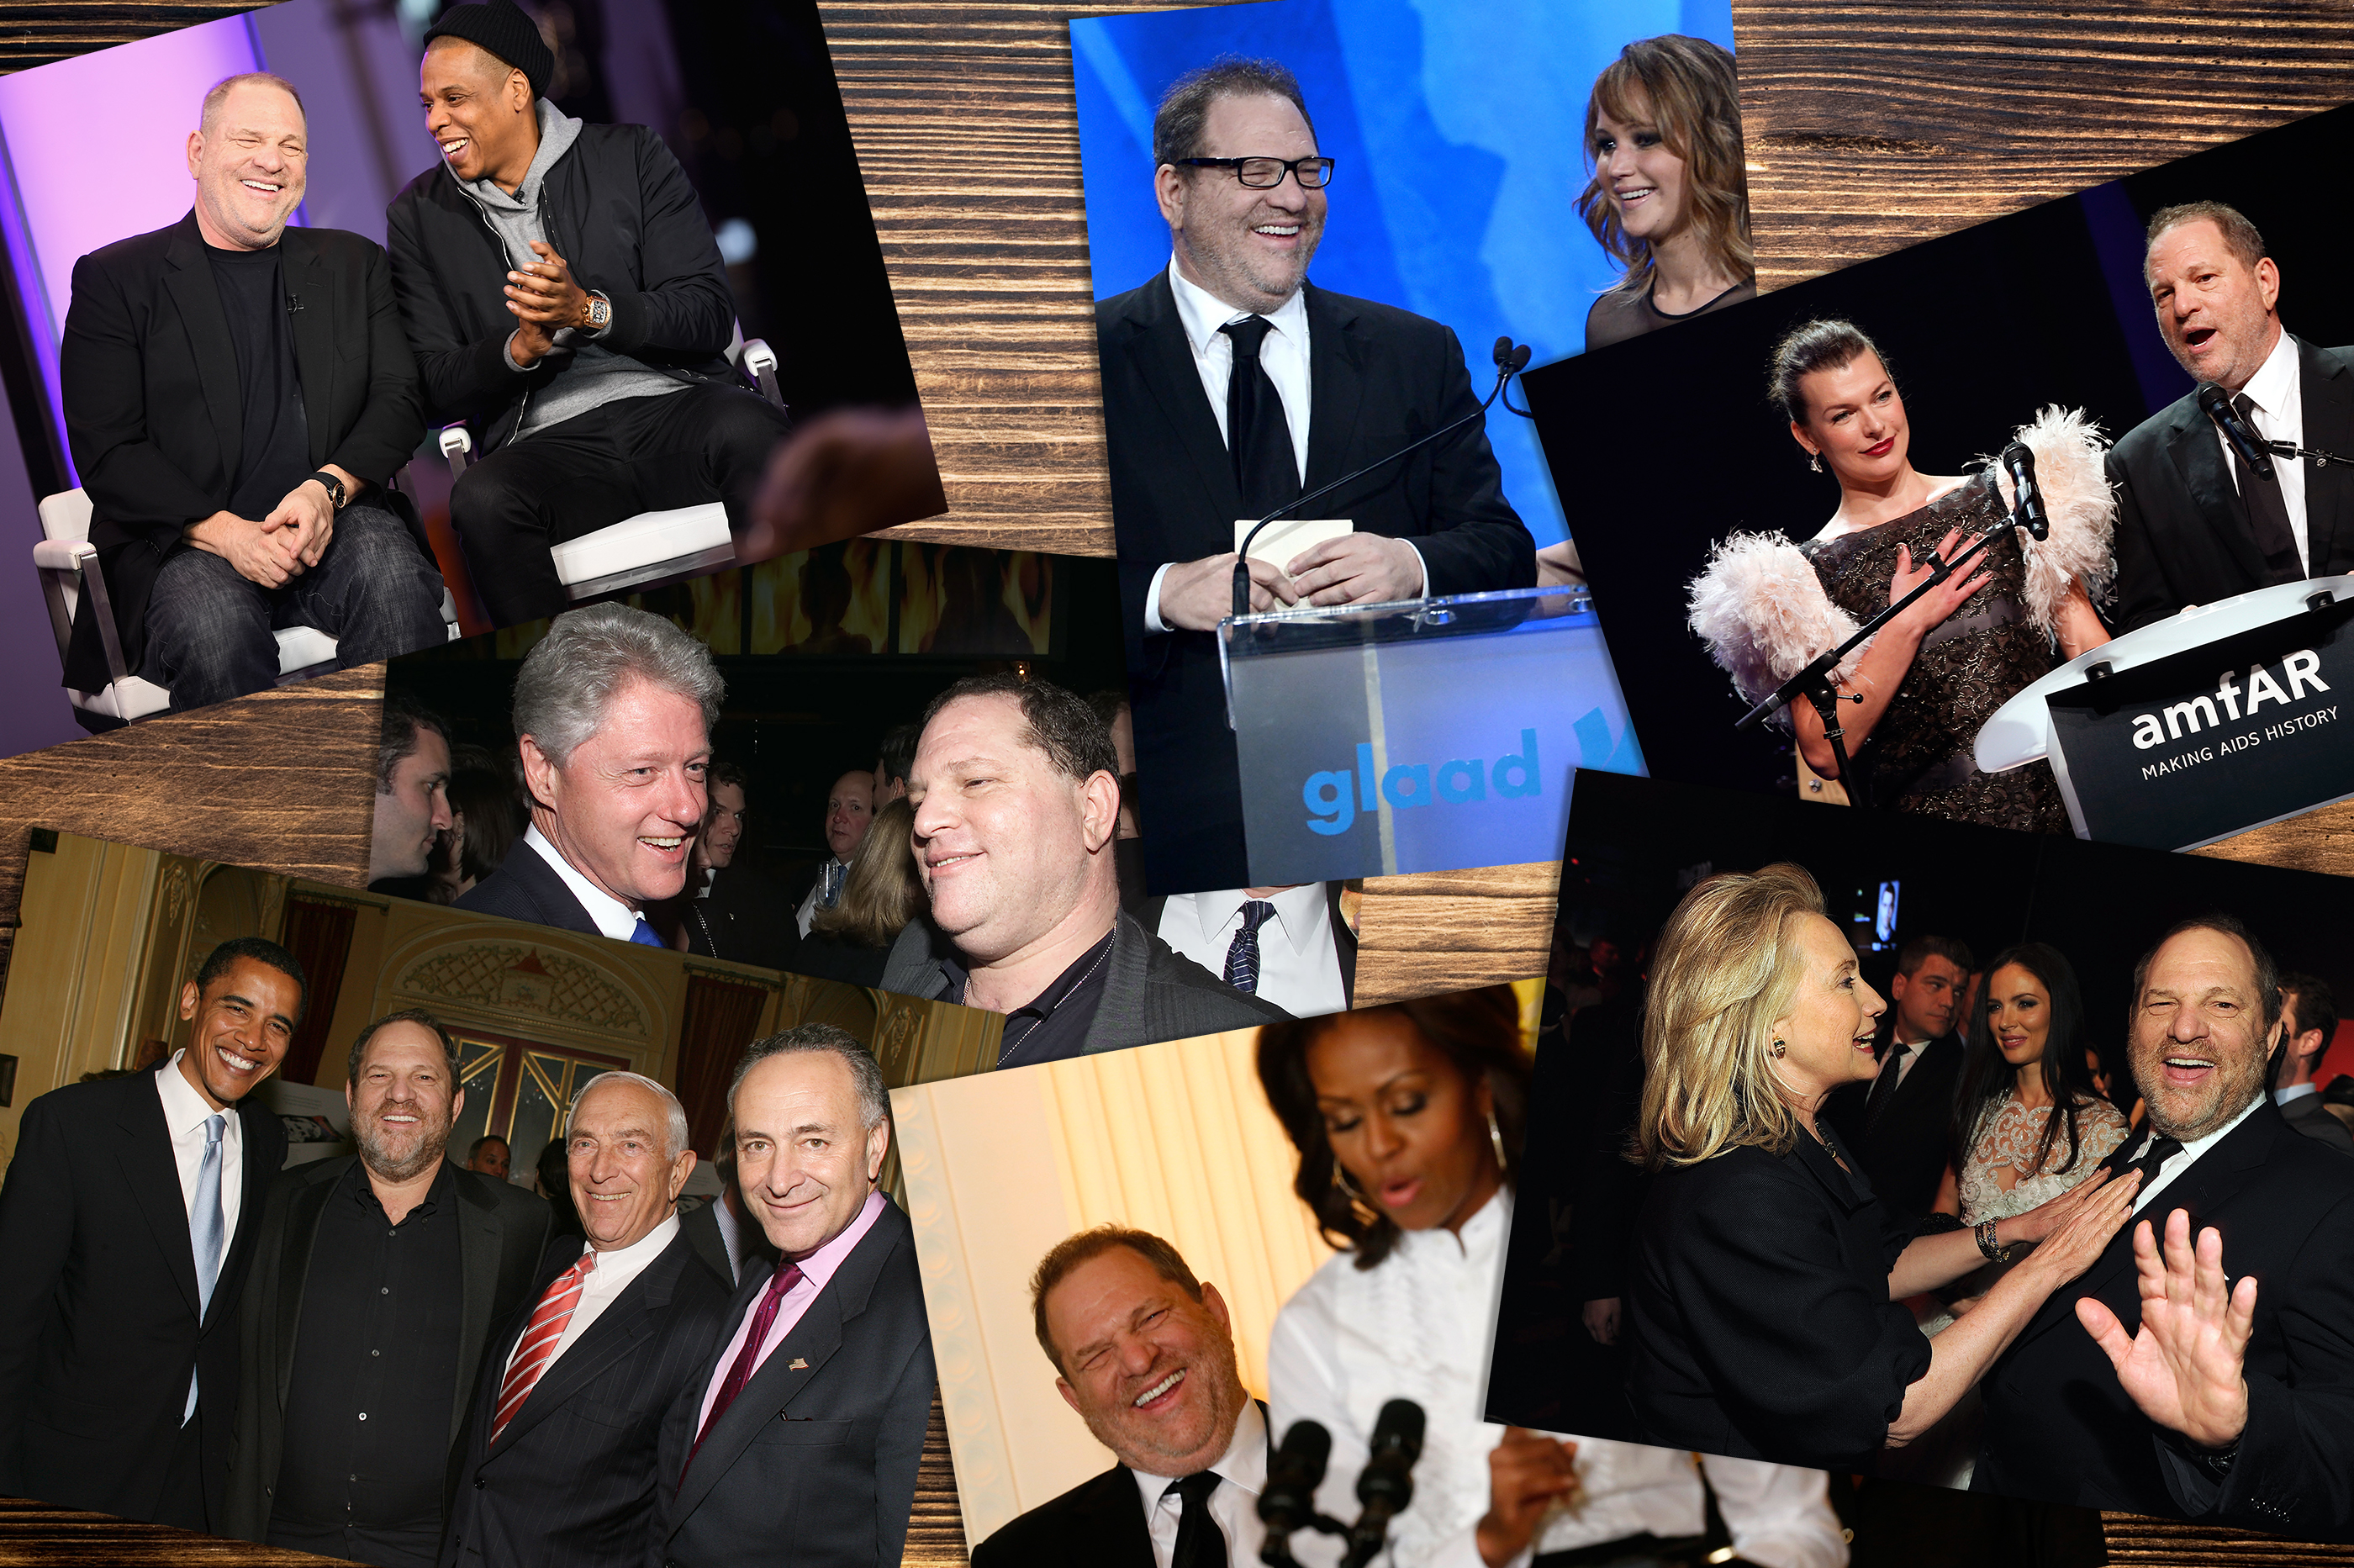 (Clockwise from top left) Harvey Weinstein and Jay Z speak onstage for SpikeTV, 2017; Weinstein and actress Jennifer Lawrence speak onstage during the 24th Annual GLAAD Media Awards; then-Secretary of State Hillary Rodham Clinton and Weinstein attend the TIME 100 Gala in 2012; Weinstein laughs at remarks directed at him by U.S. first lady Michelle Obama as she hosts a workshop at the White House for high school students about careers in film in Washington in 2013; President Bill Clinton and Weinstein at Hillary Clinton's birthday party in 2000; then-Sen. Obama, Weinstein, others attend a private dinner and screening in 2006.